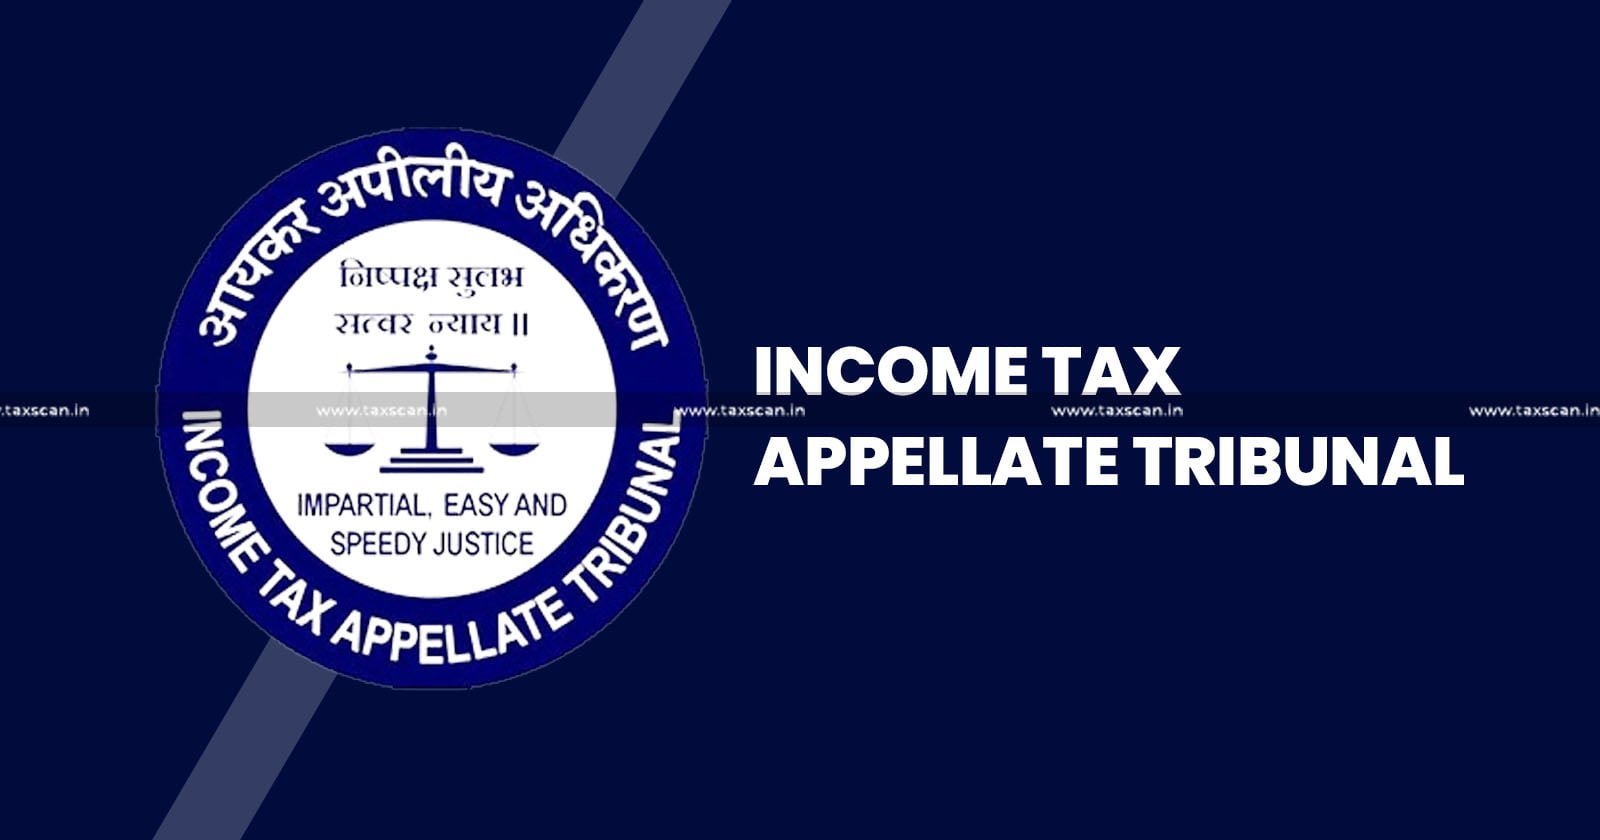 ITAT - income tax acts - ITAT ruling on family settlement - Income Tax Act - ITAT ruling section 69 -TAXSCAN